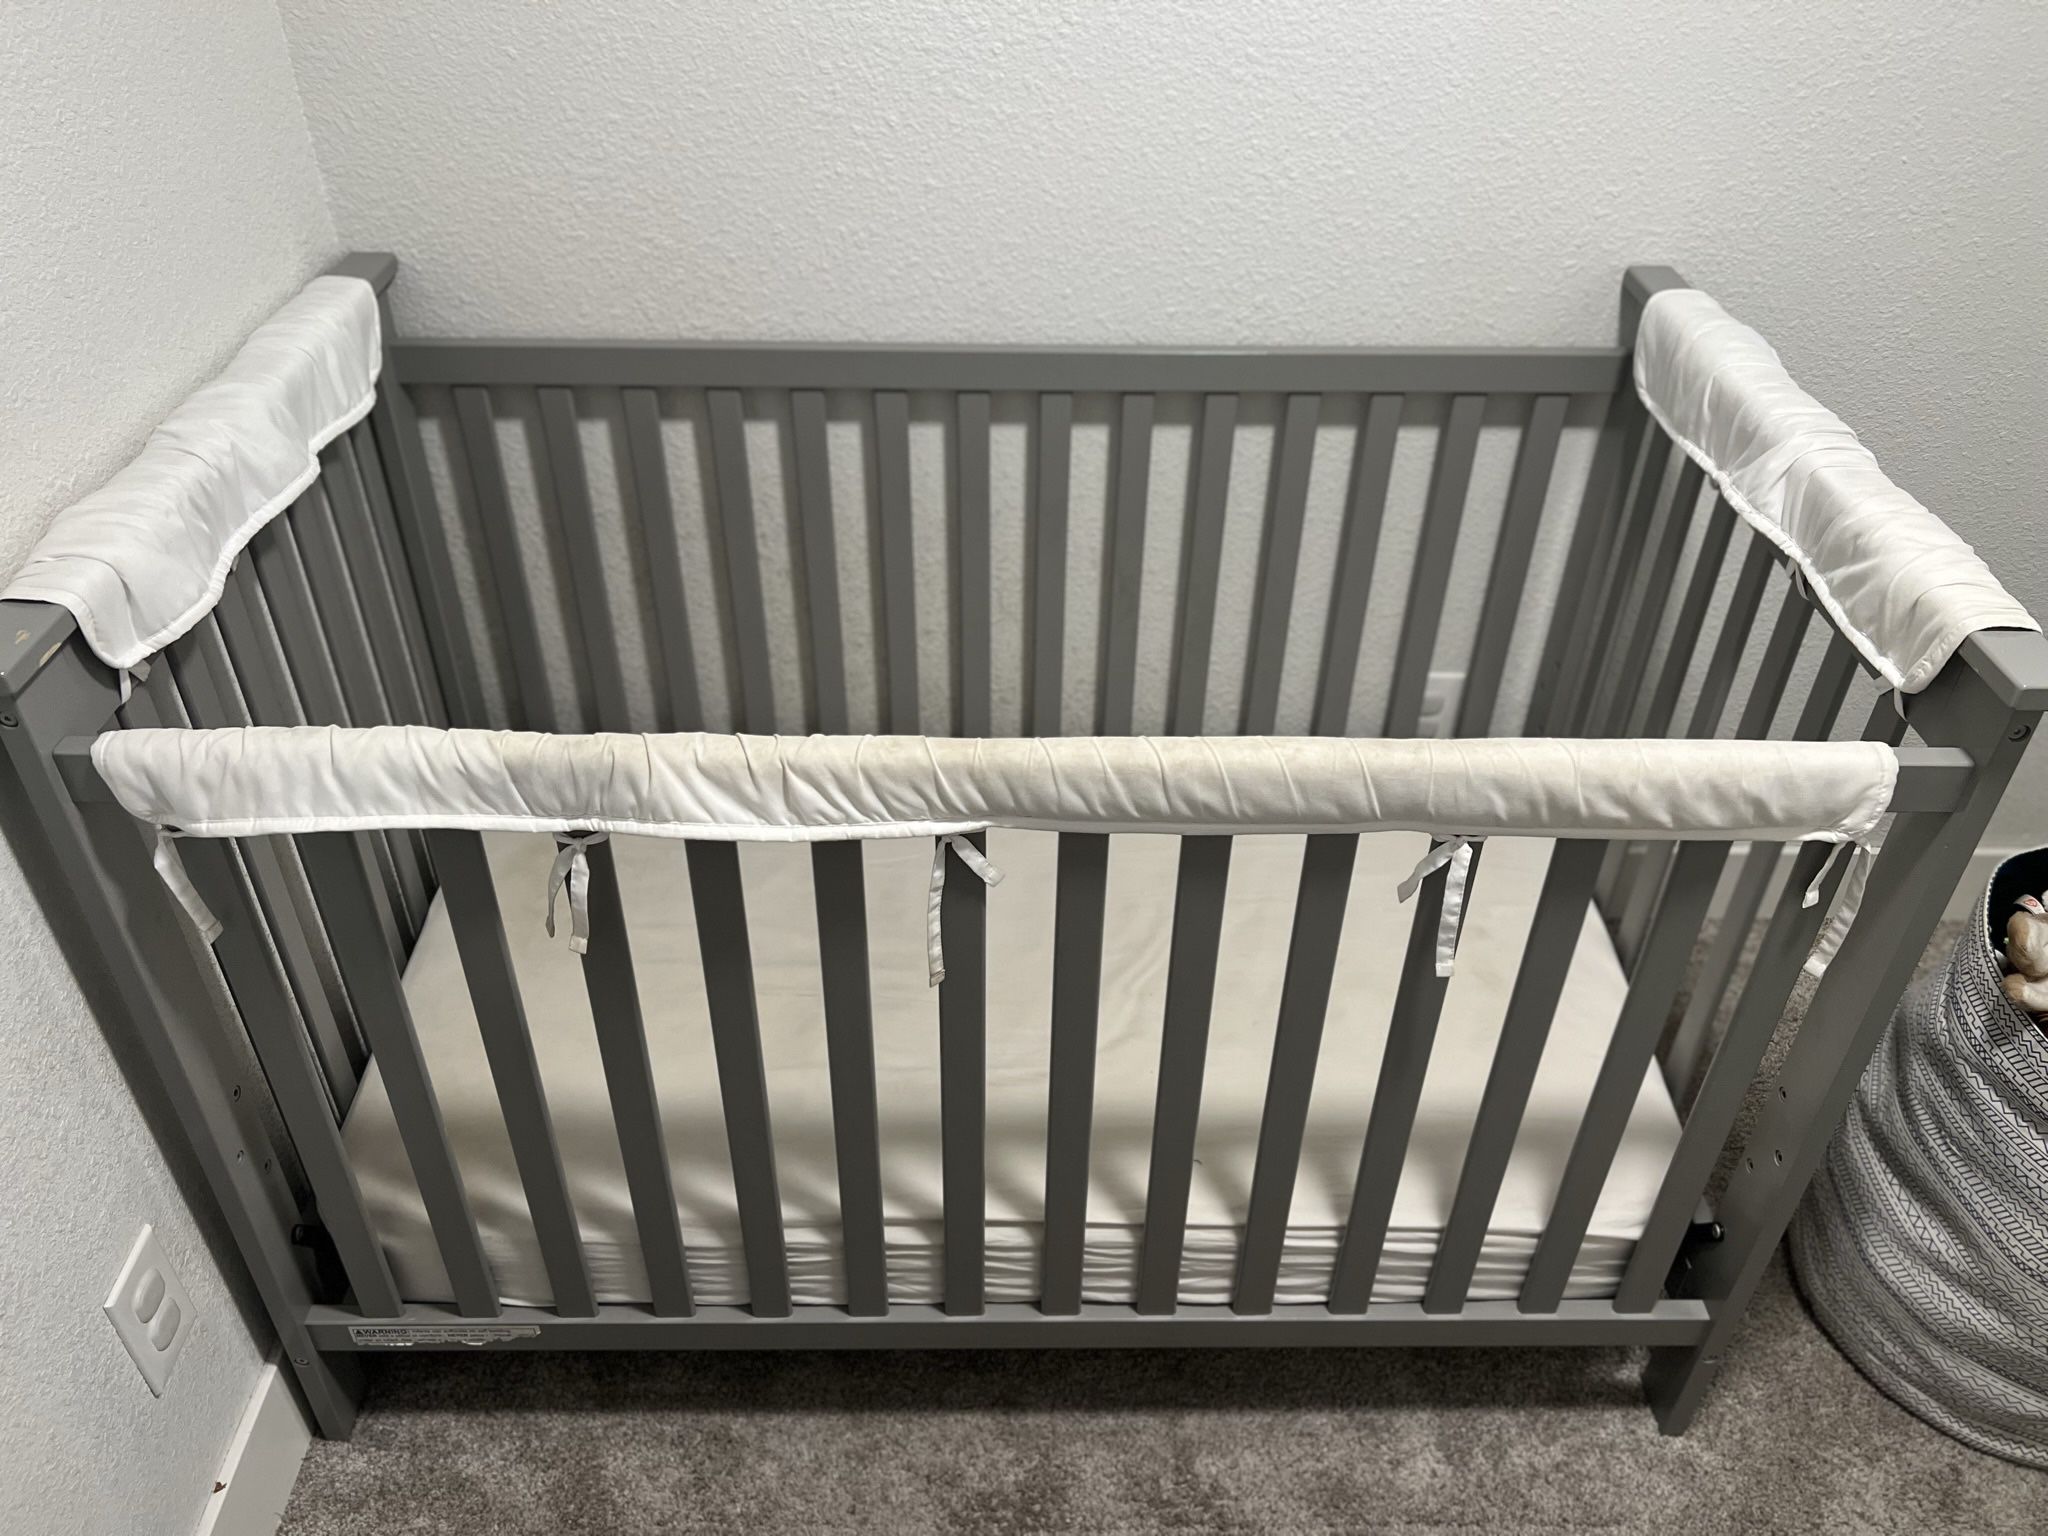 Crib With Mattress, Cover, Sheet And Bumpers 